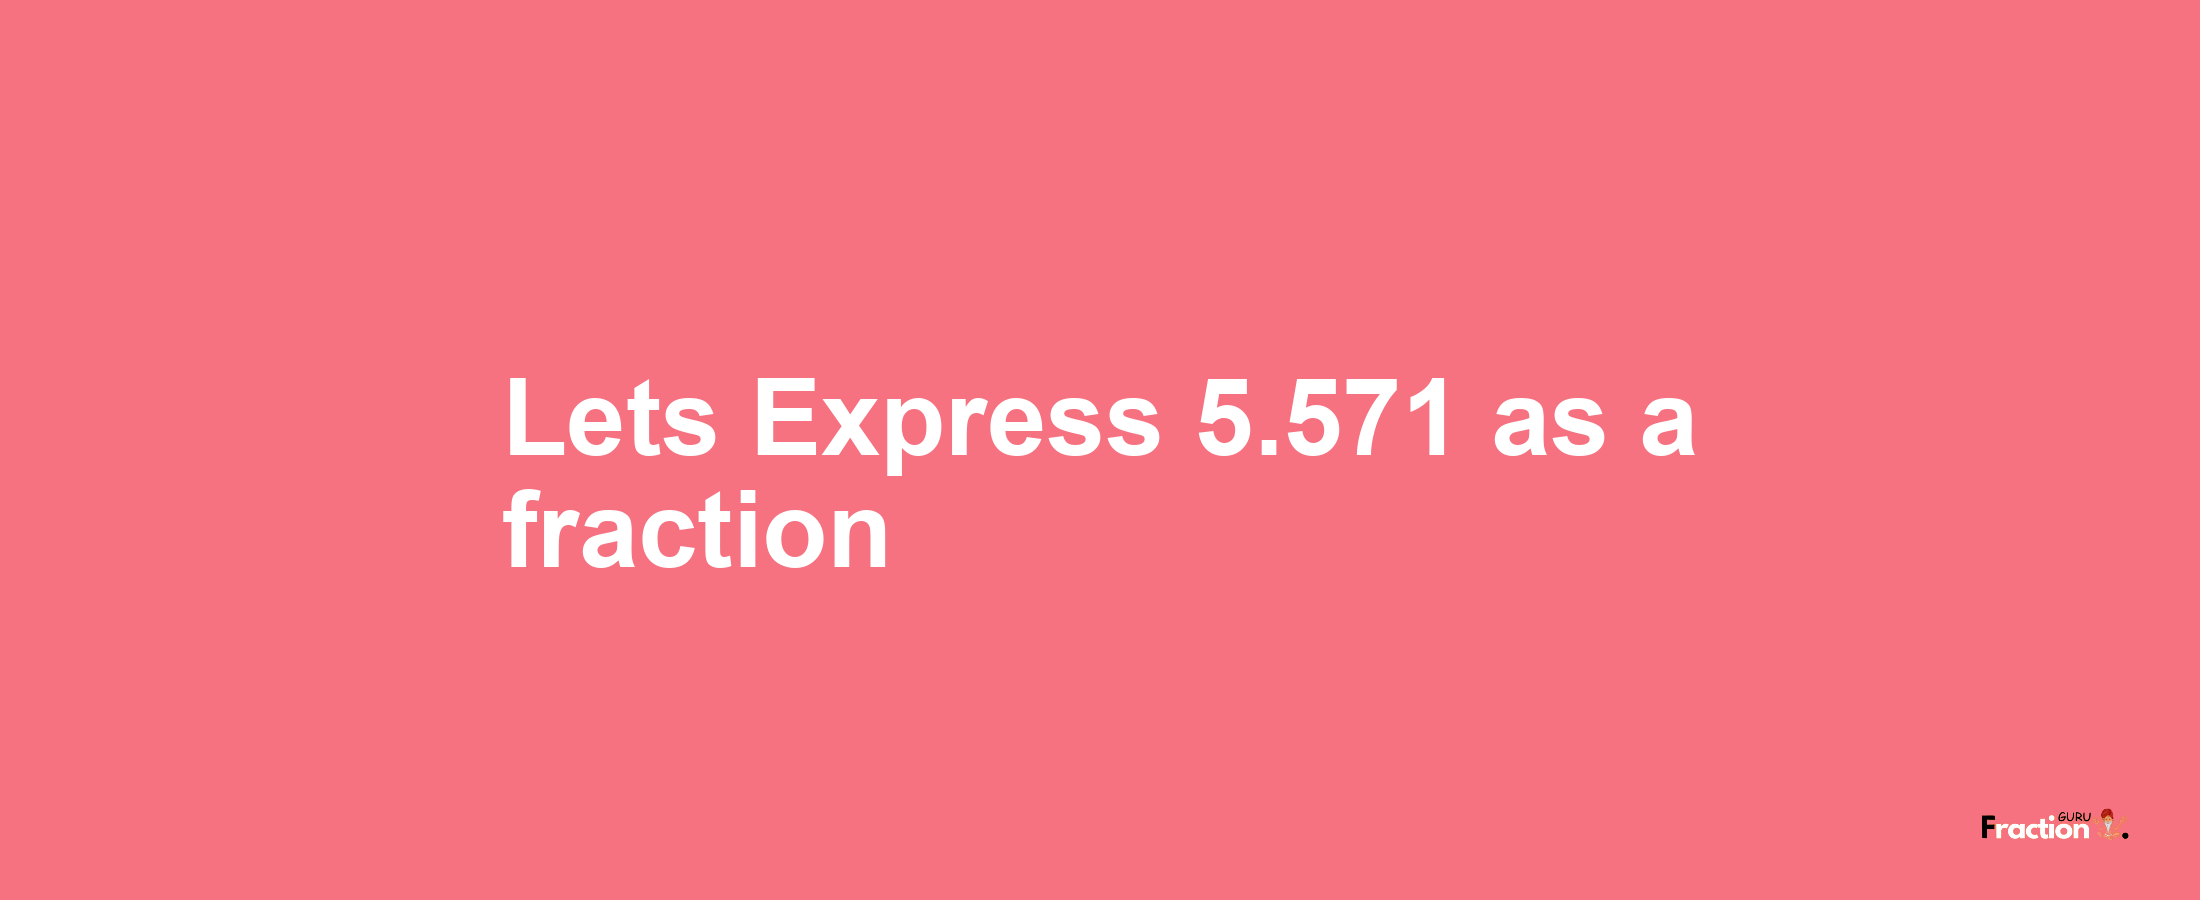 Lets Express 5.571 as afraction